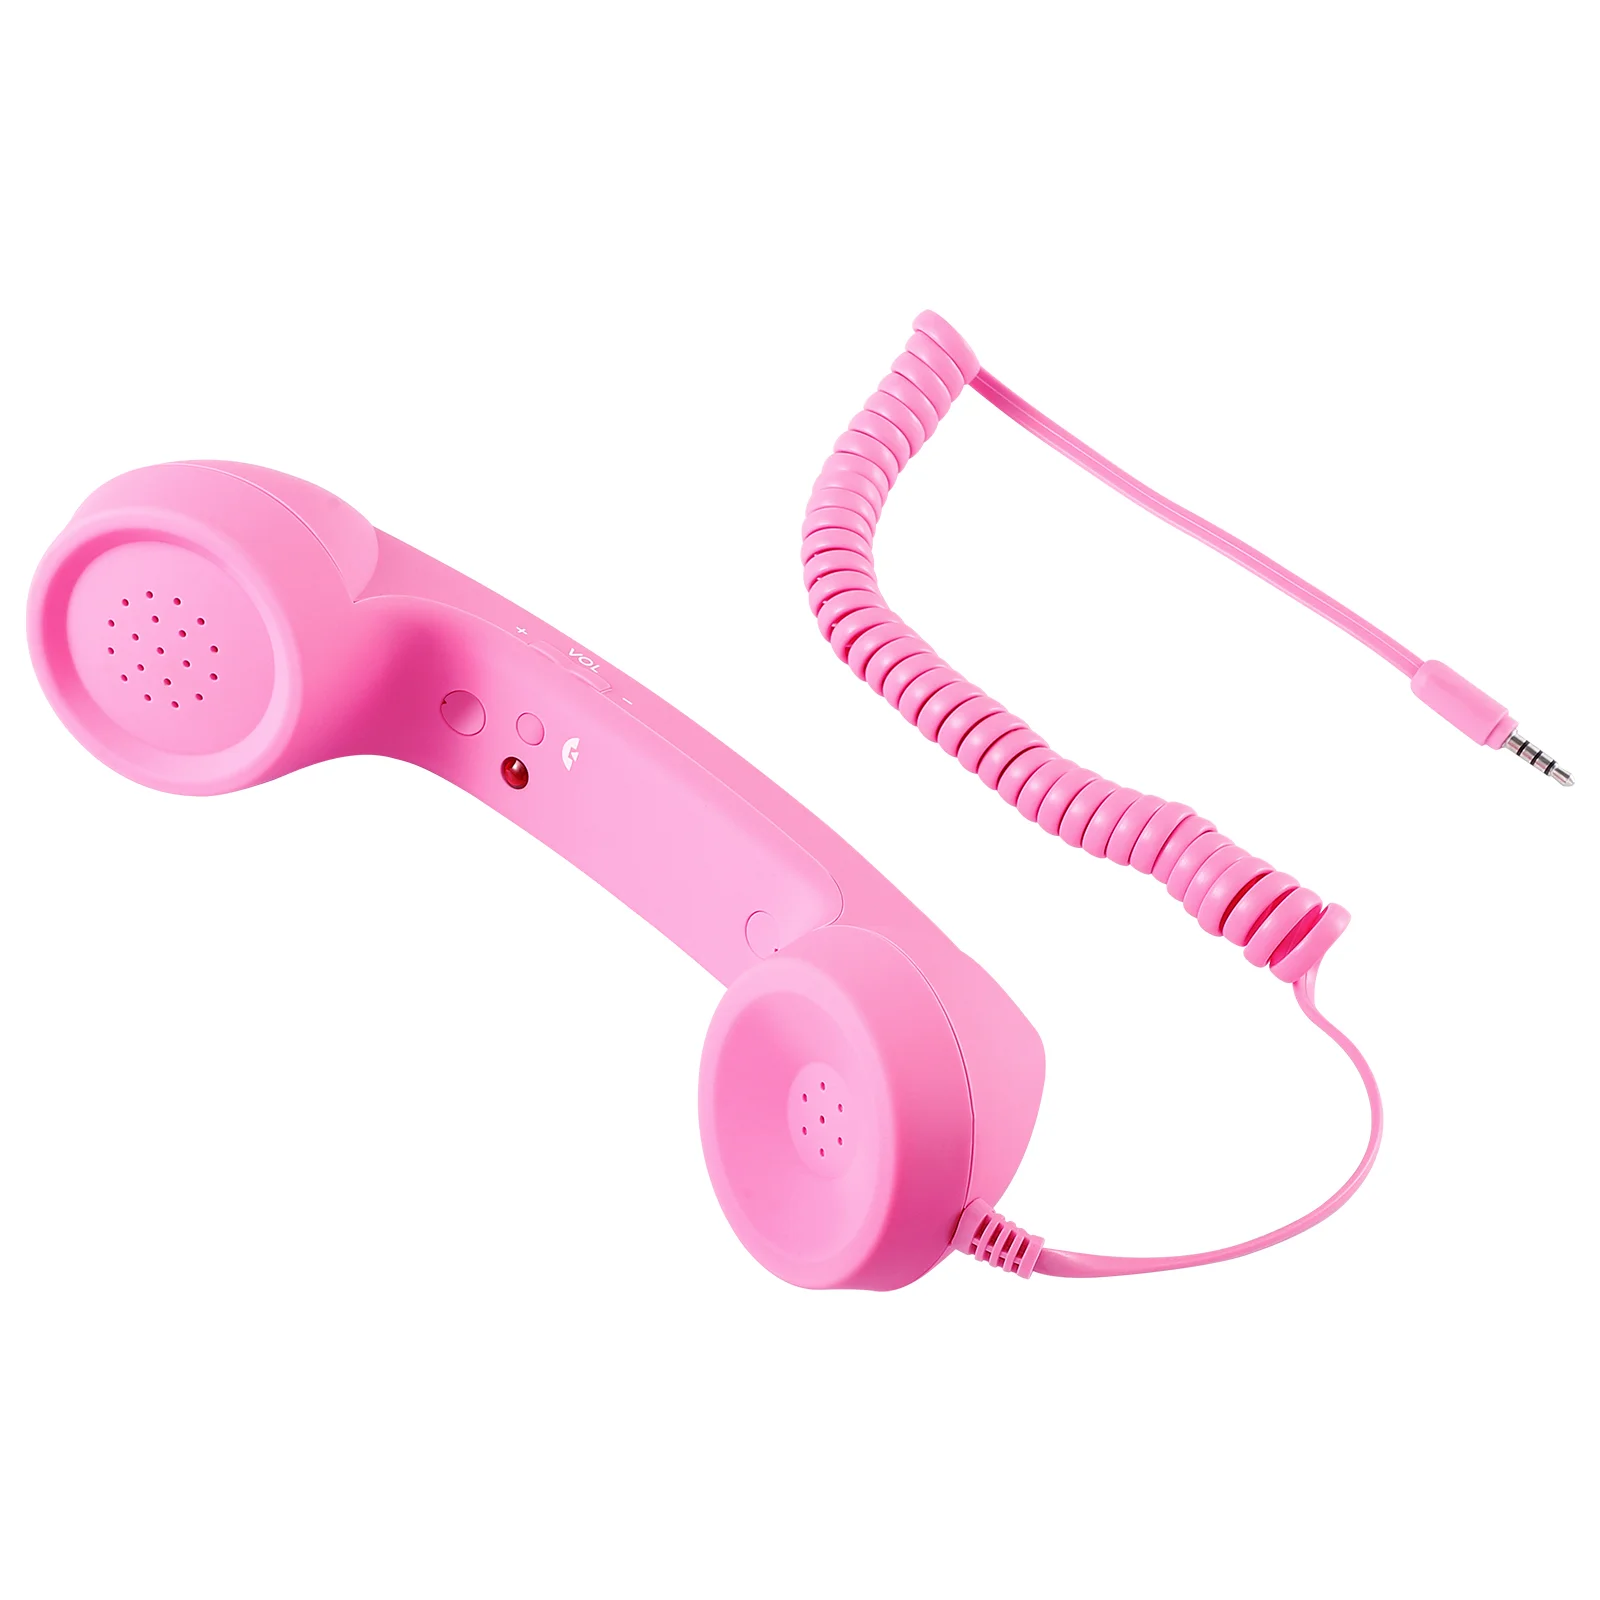 

UKCOCO Cellphone Retro Handset 35MM Smart Phone Receiver Old Style Mobile Phone Receiver (Pink)